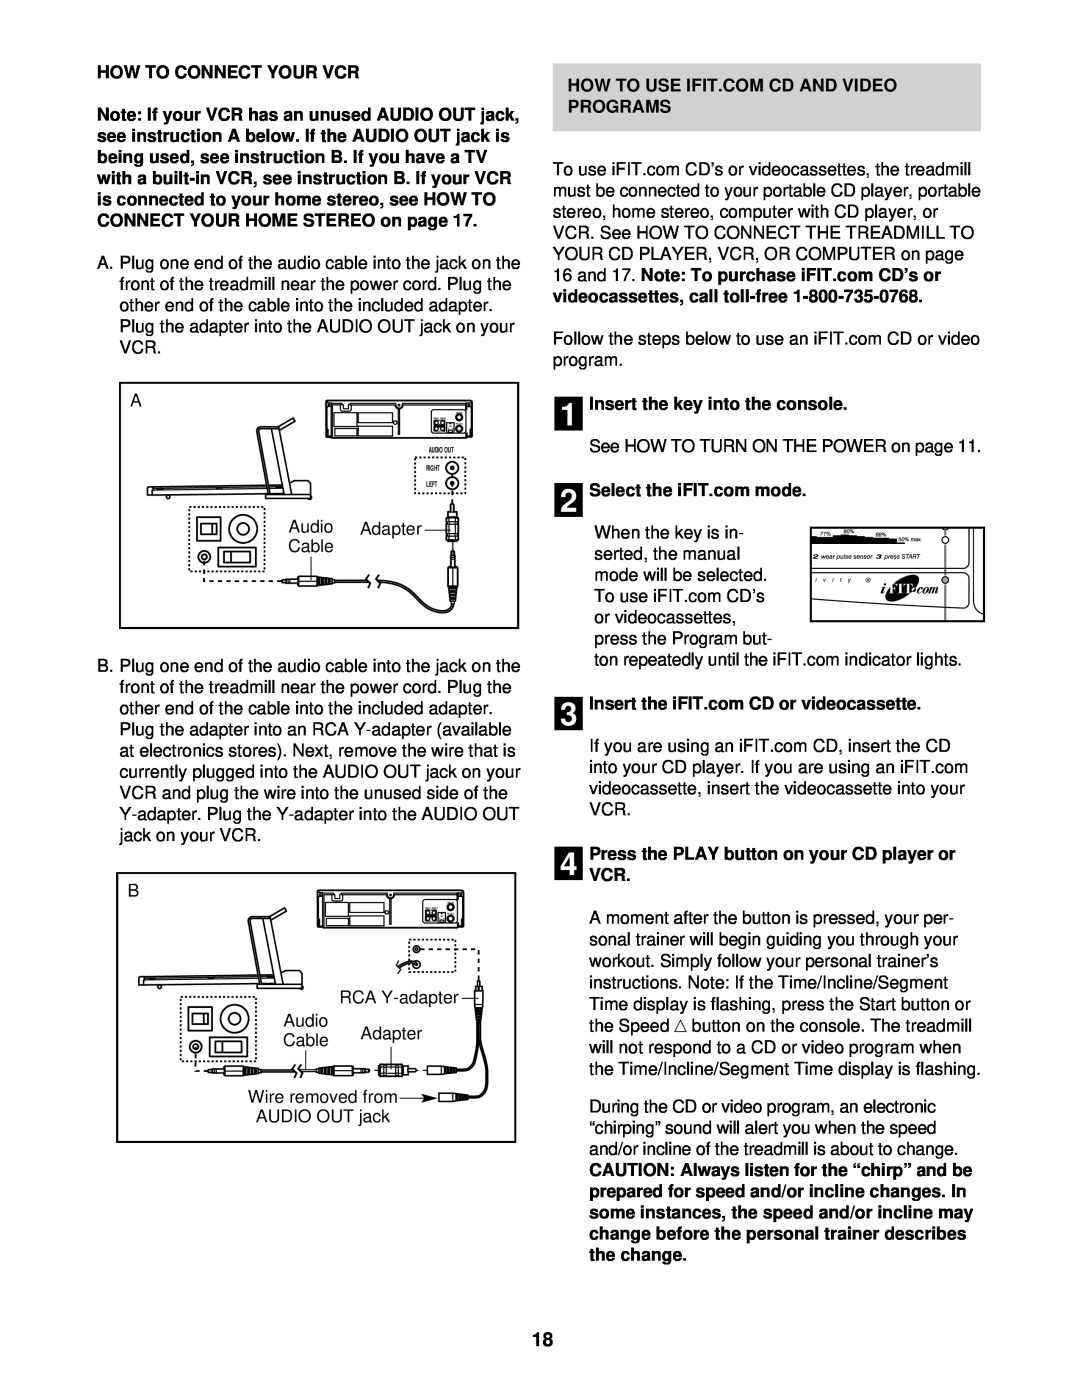 ProForm PFTL59121 user manual How To Connect Your Vcr, How To Use Ifit.Com Cd And Video Programs, Audio, Adapter, Cable 